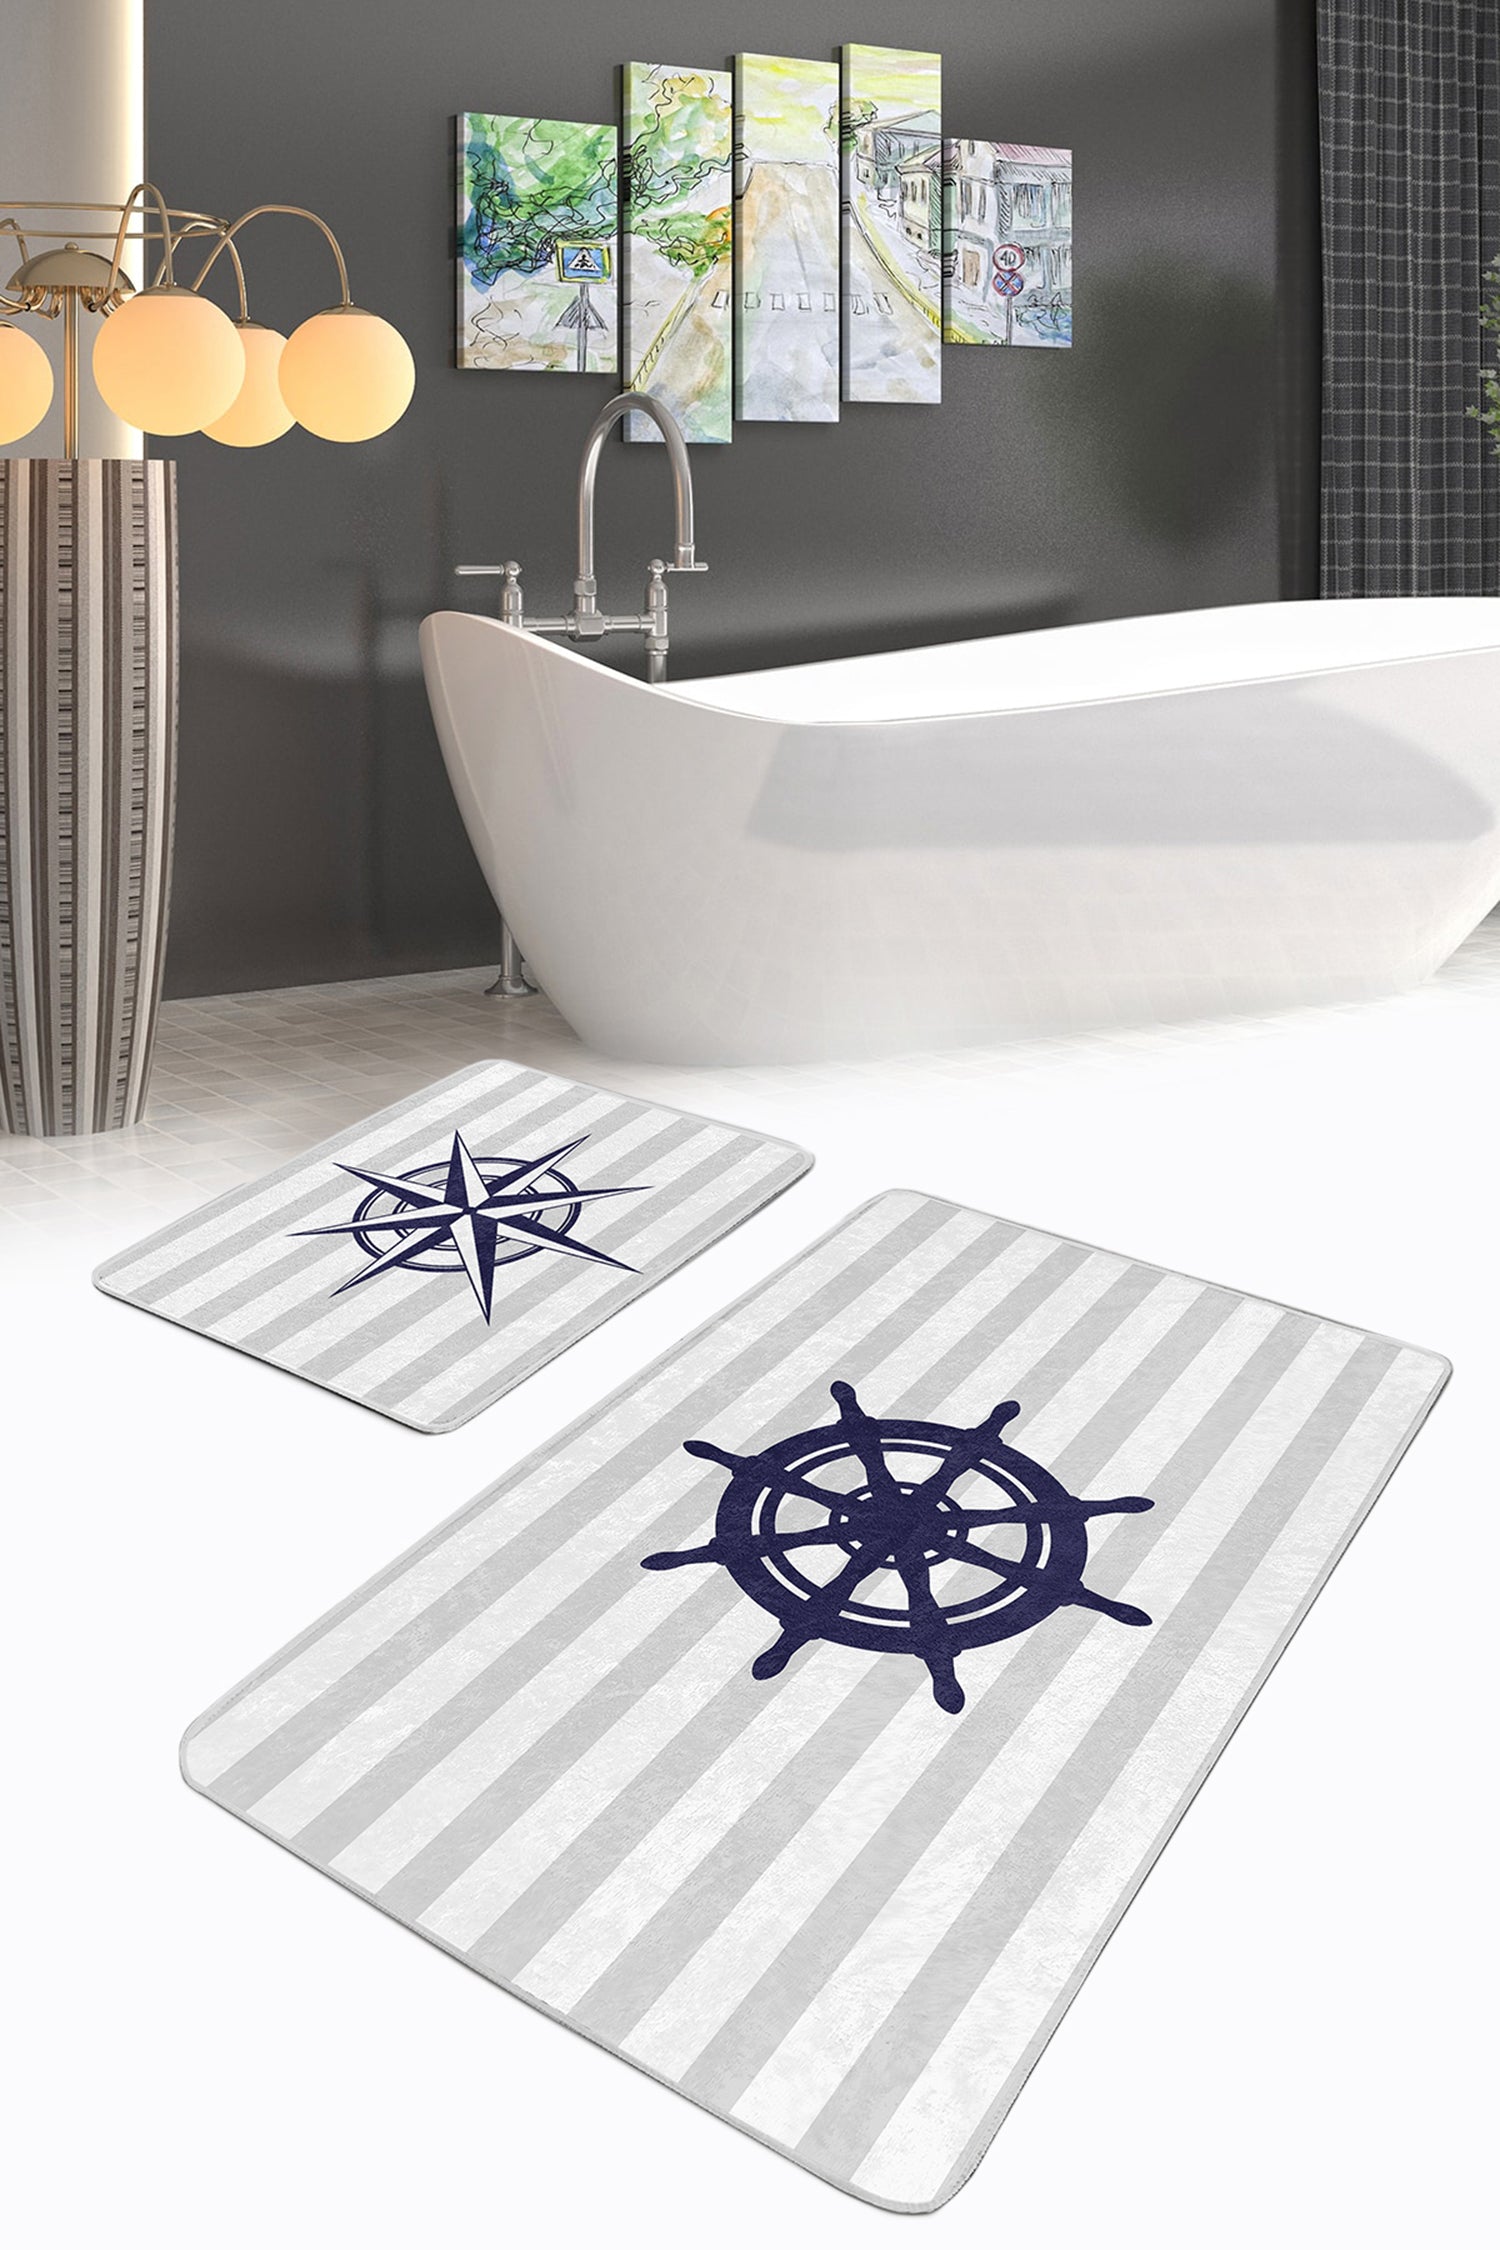 Chic and Inviting Set with Nautical Elegance for a Trendy Bathroom